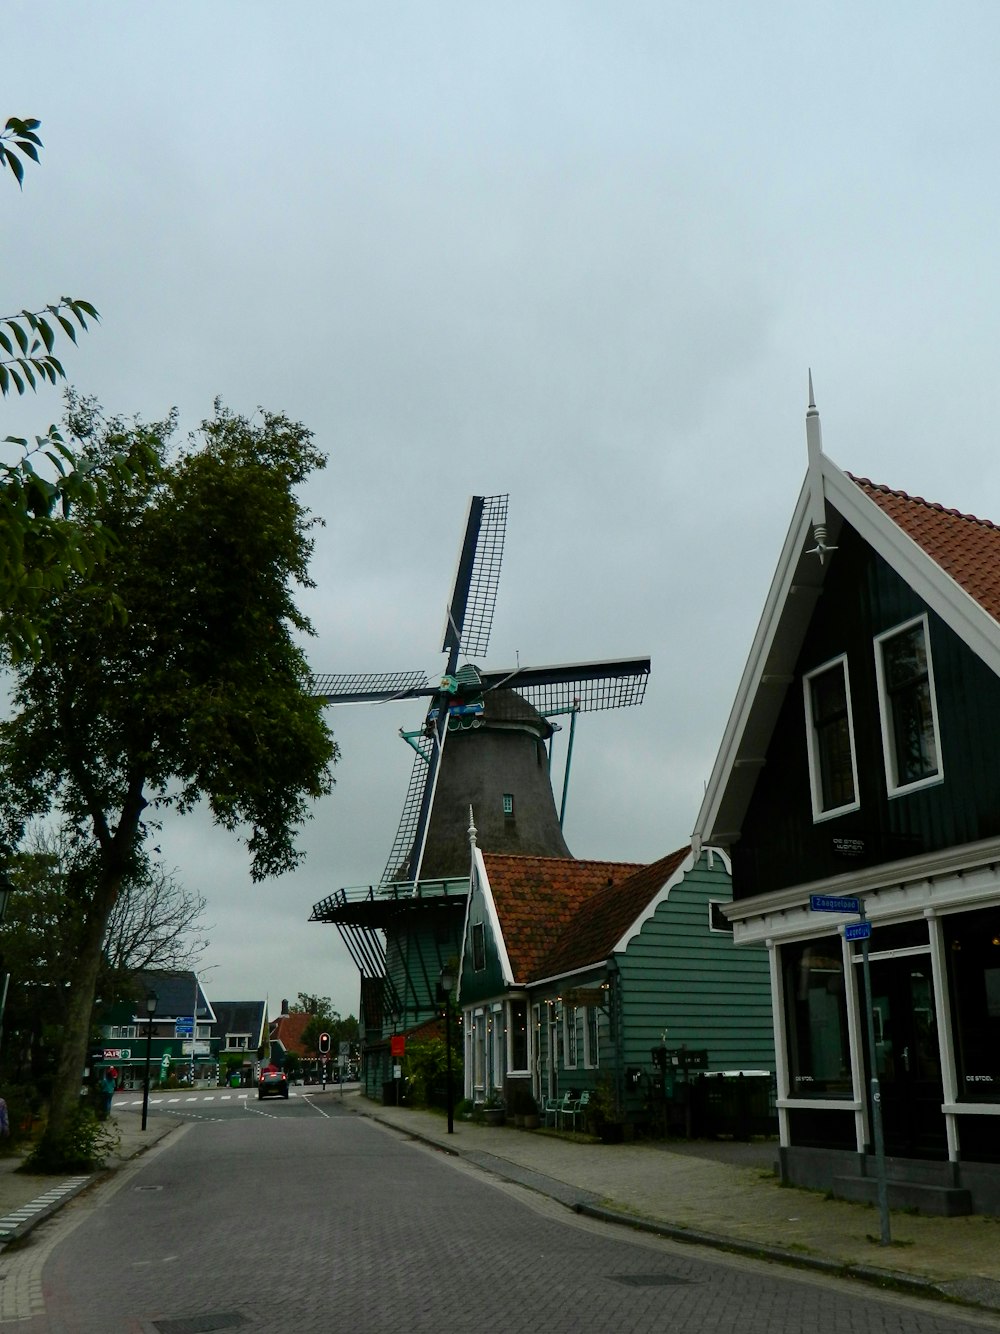 a row of houses with a windmill in the background